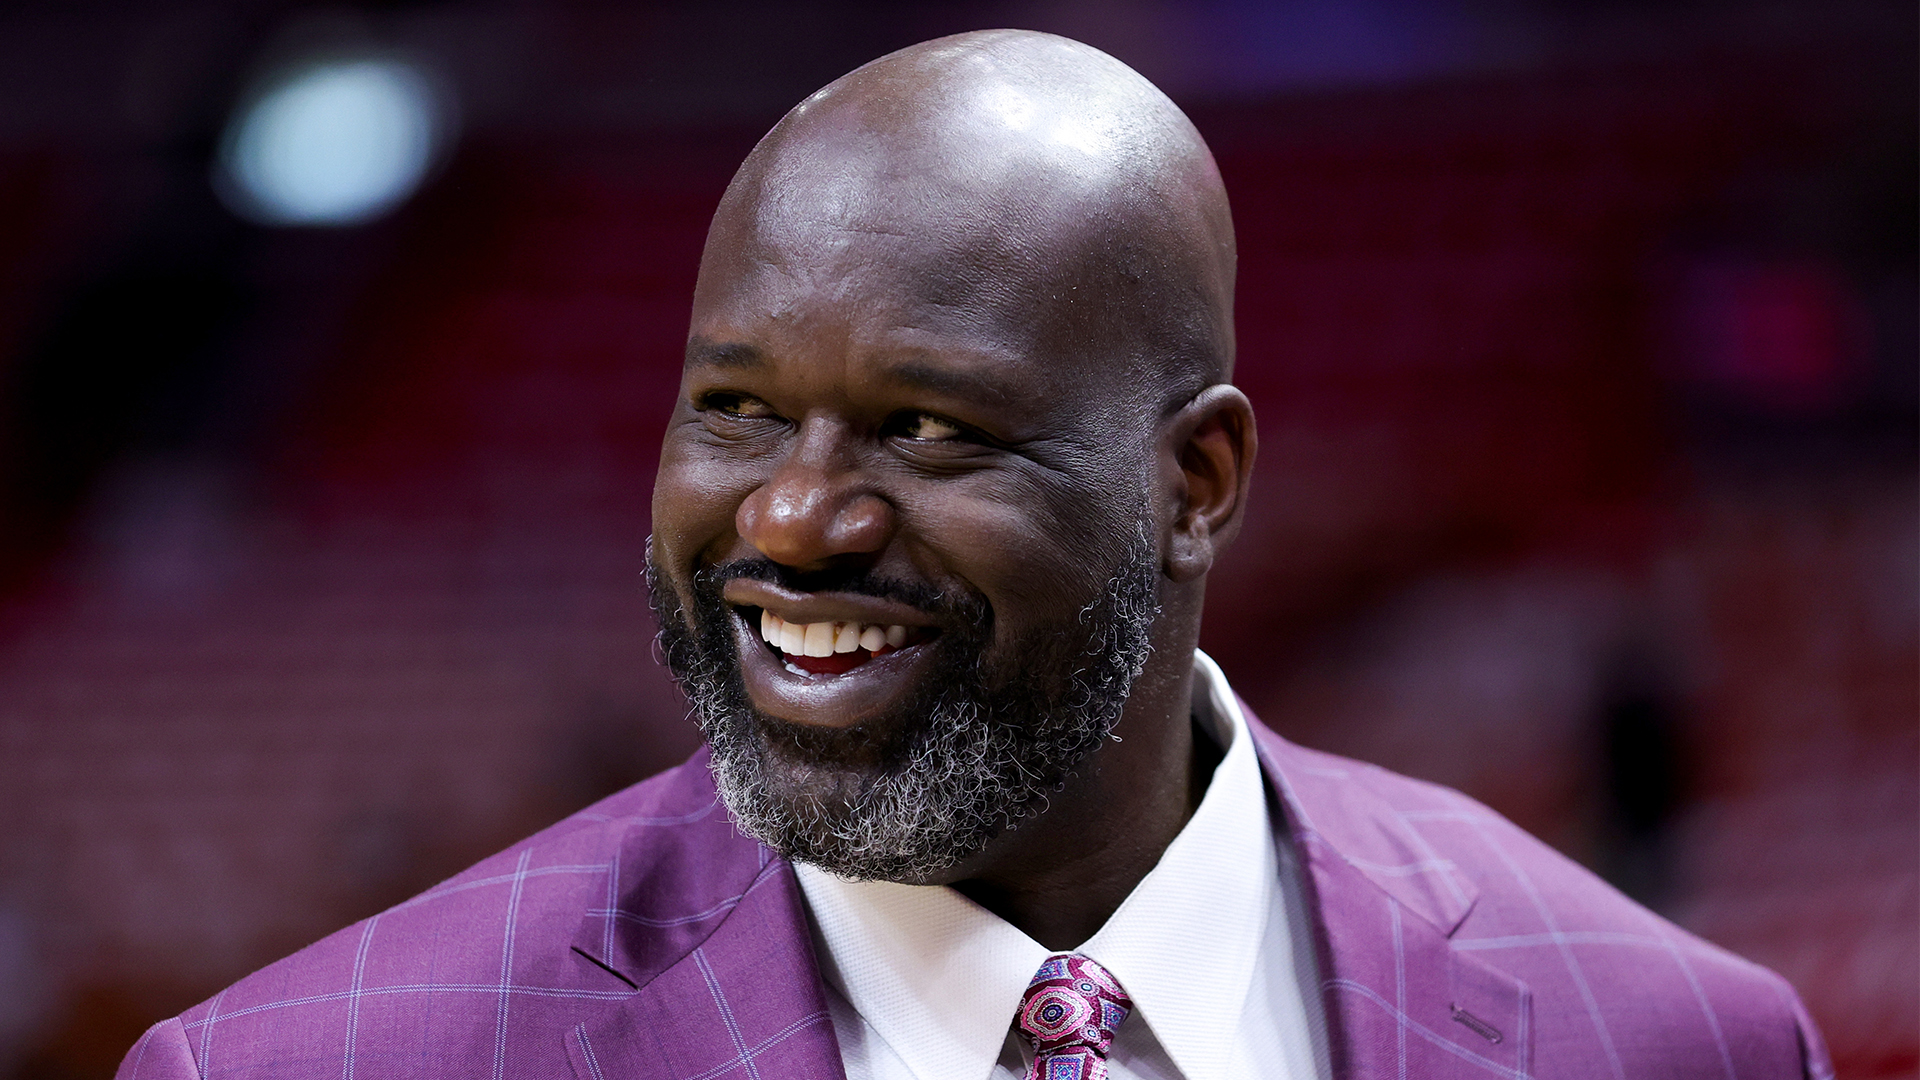 Shaquille O'Neal's Big Chicken Restaurant Is Making Its Way To His Home State